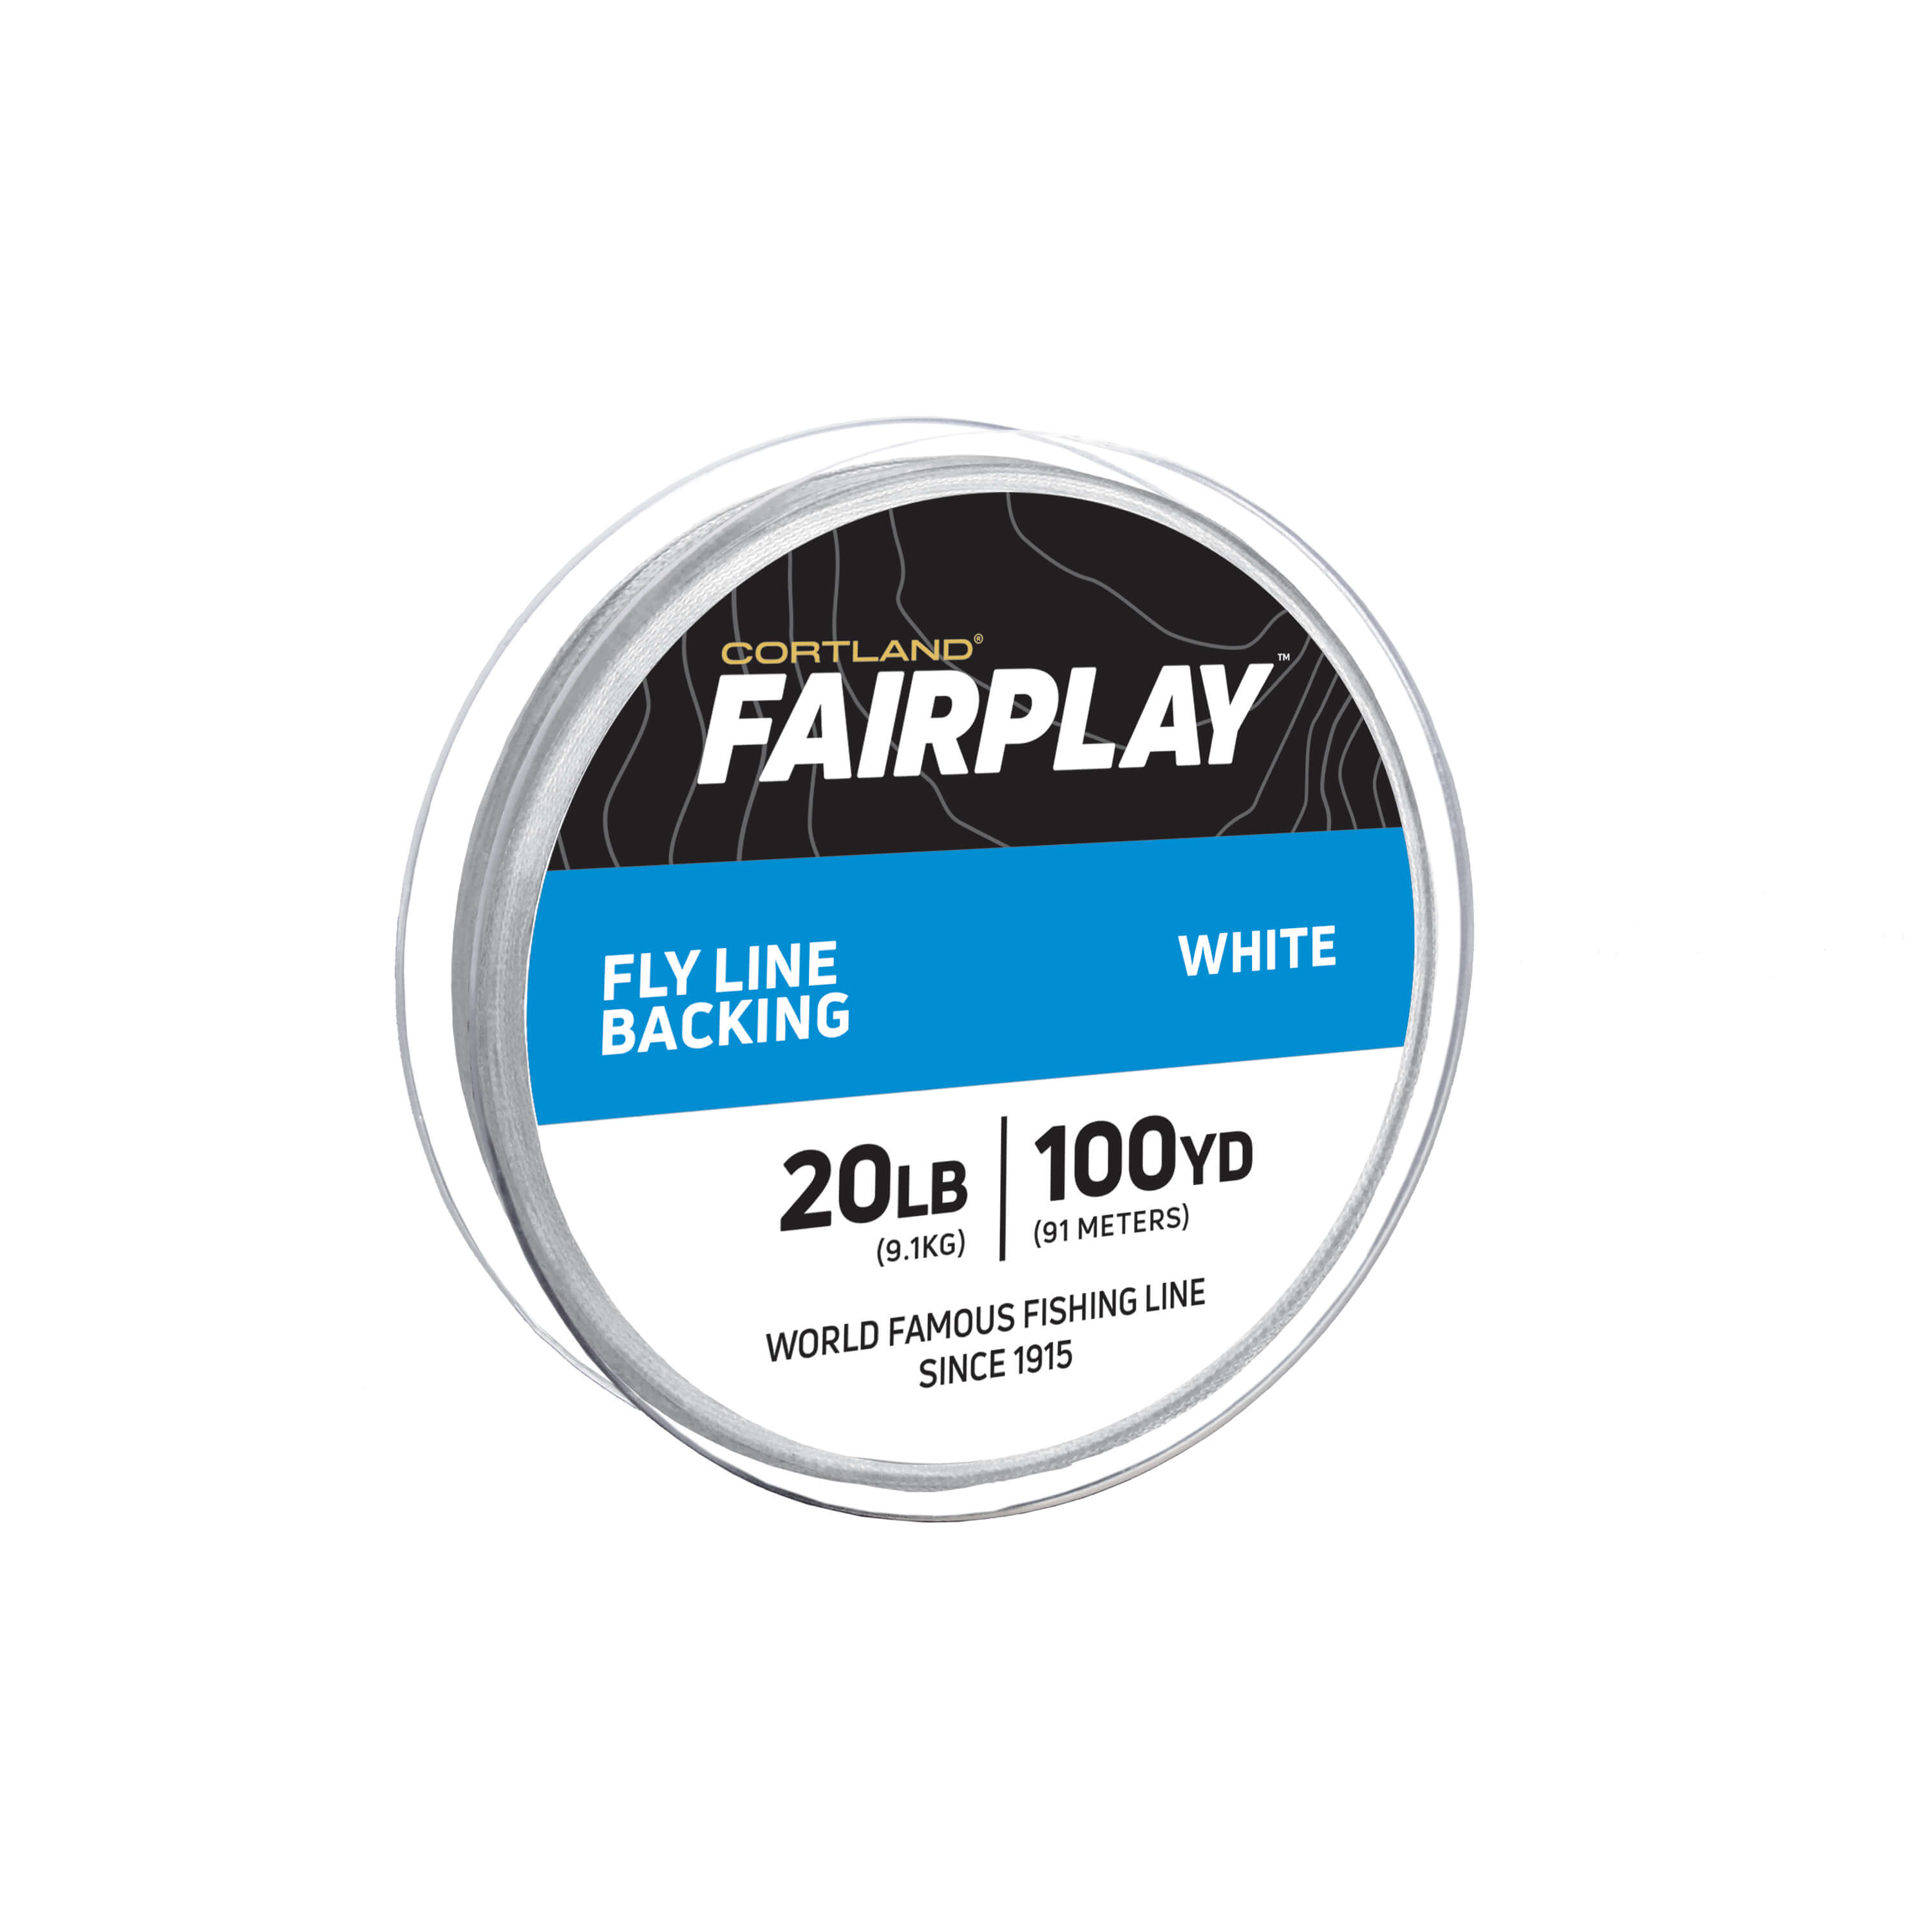 Cortland Fairplay Fly Line Backing - White